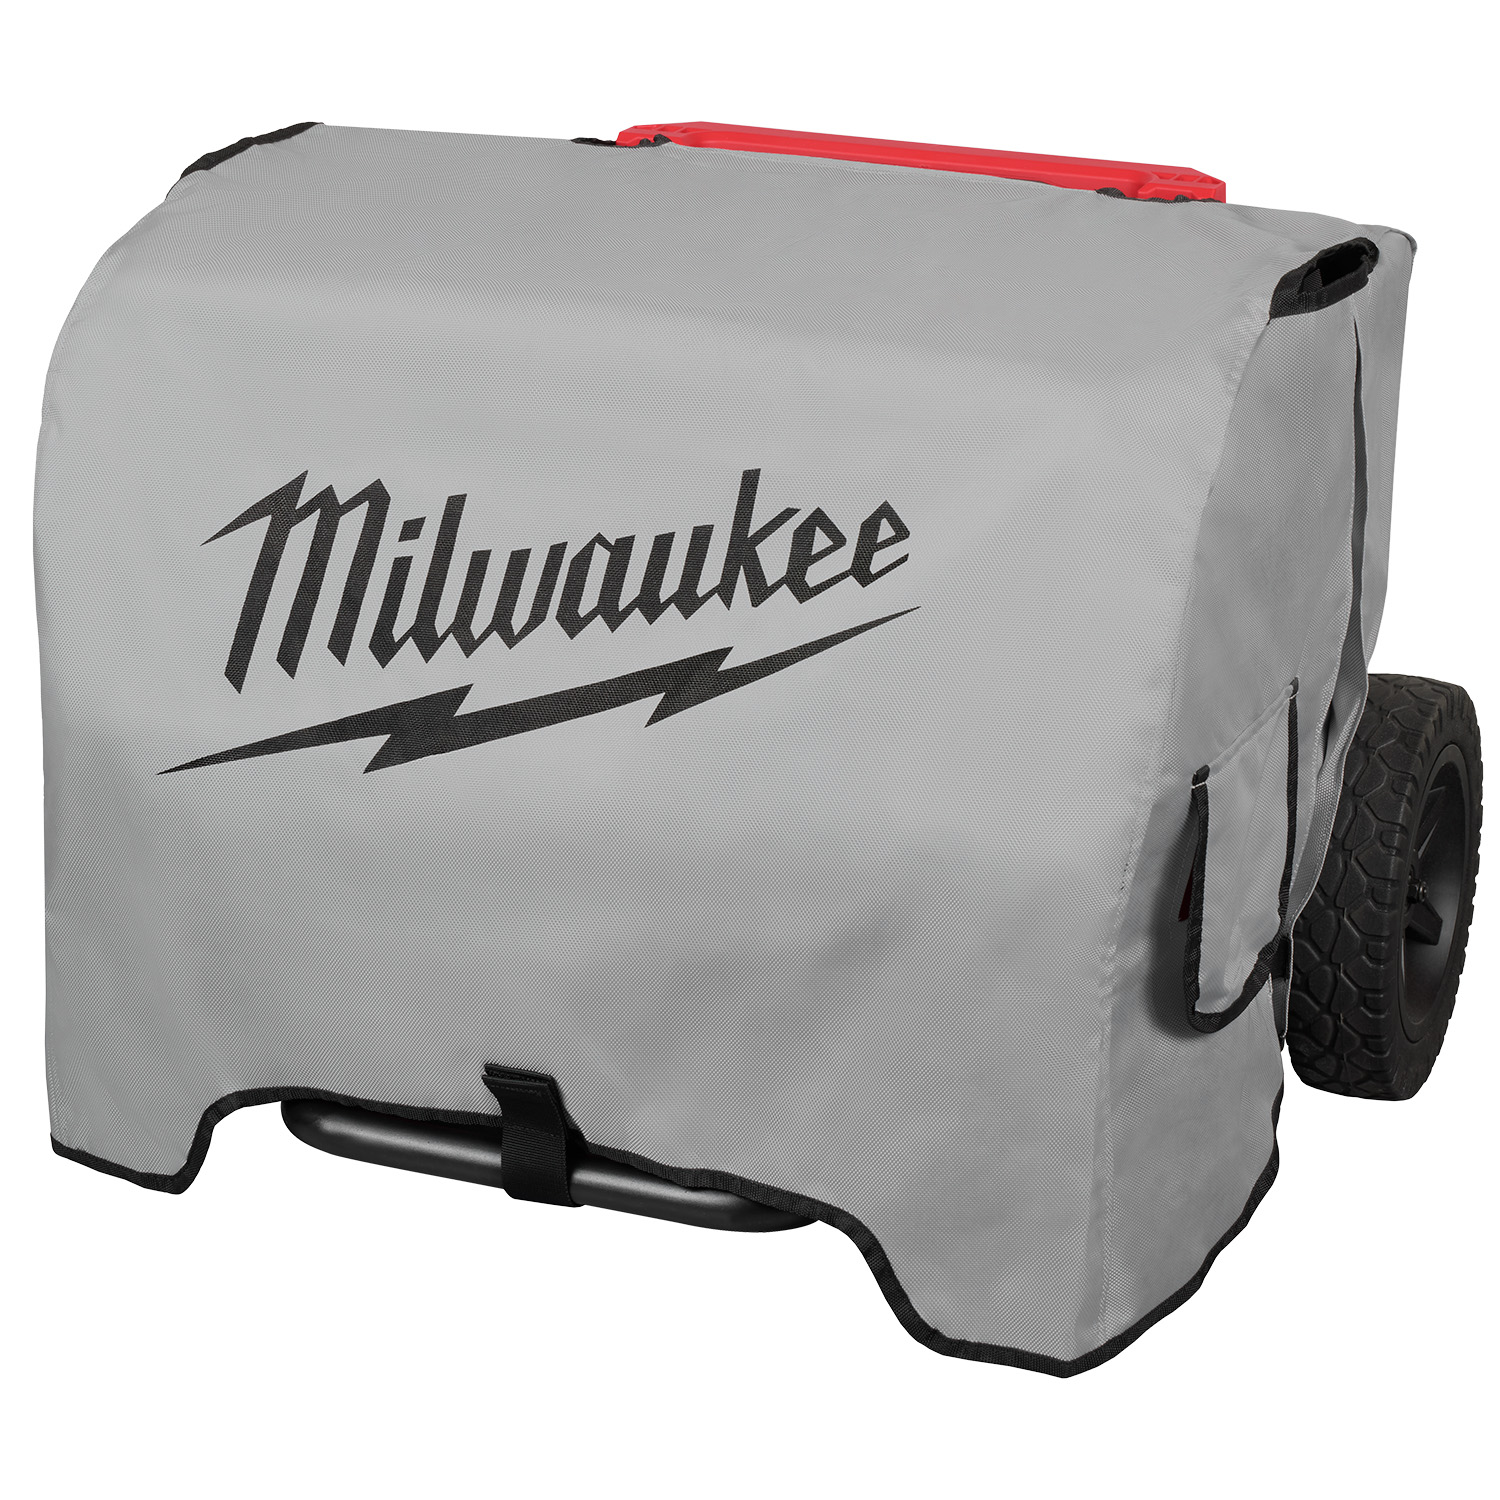 Milwaukee ROLL-ON 7200W/3600W 2.5kWh Power Supply Protective Cover from GME Supply